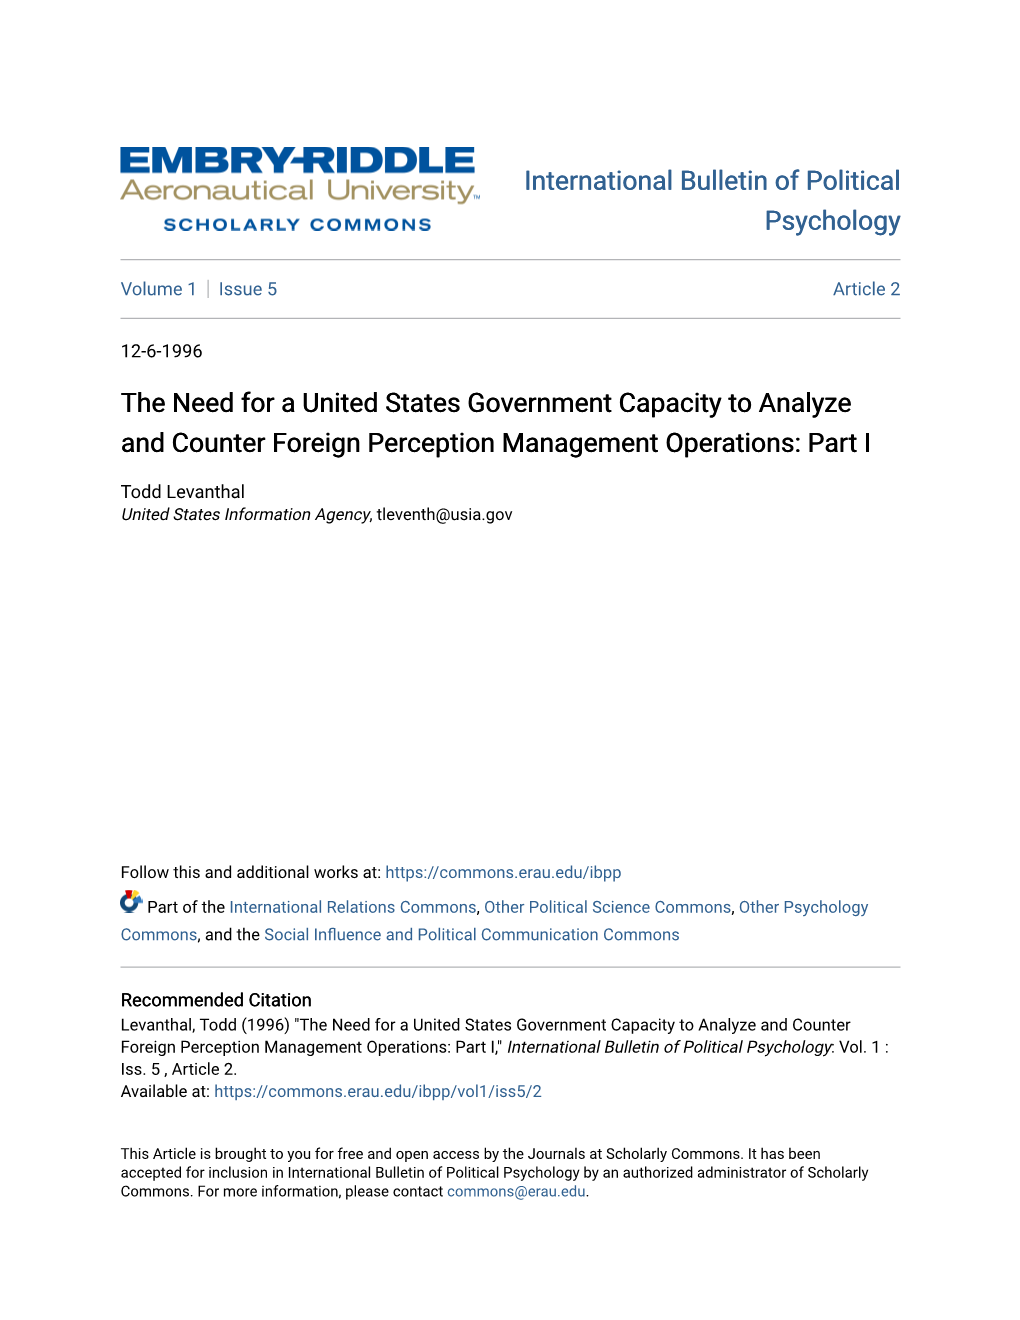 The Need for a United States Government Capacity to Analyze and Counter Foreign Perception Management Operations: Part I